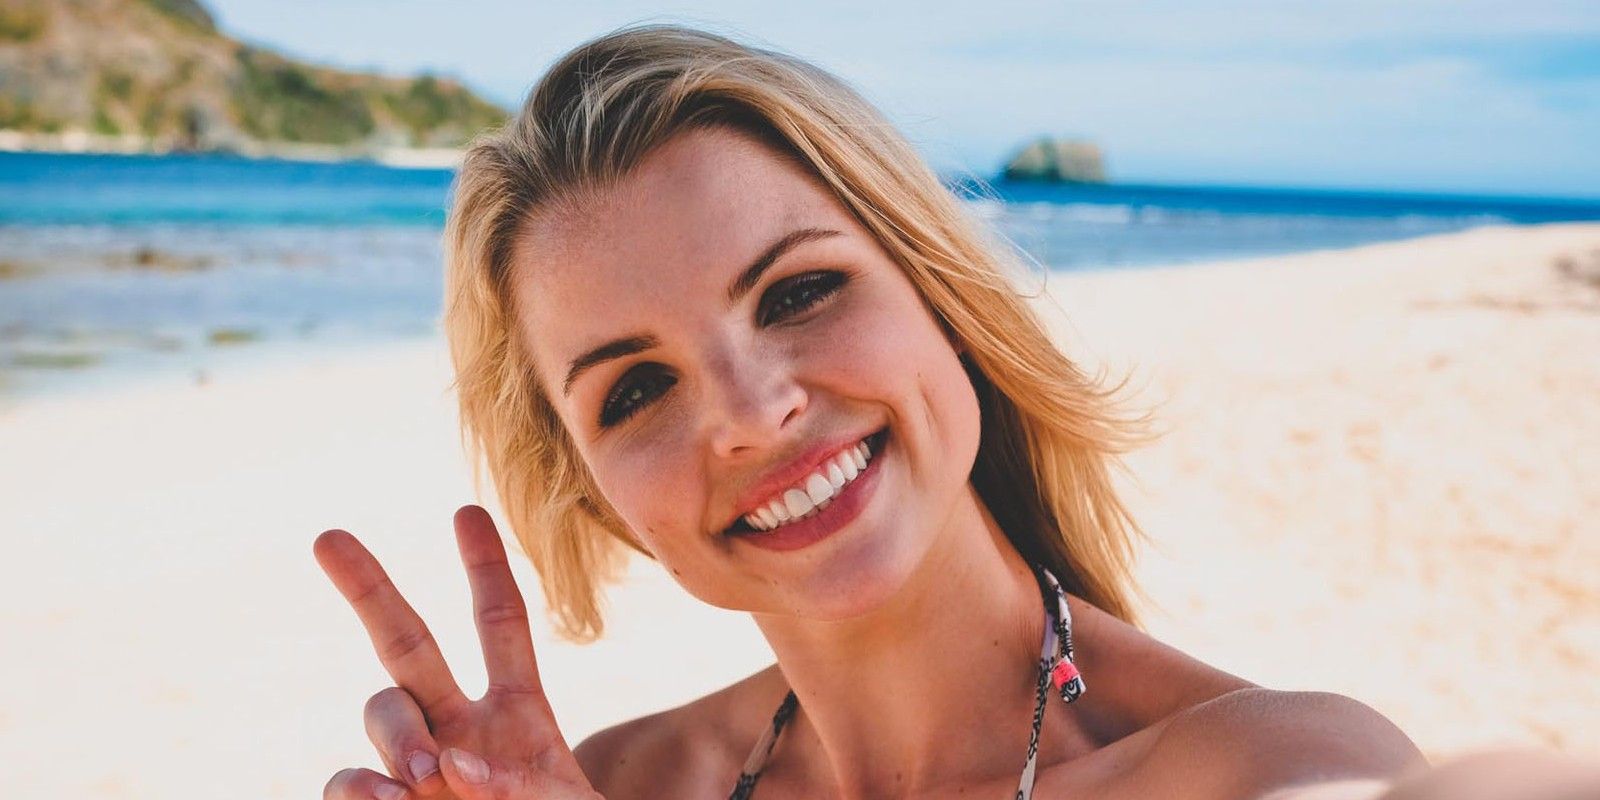 Andrea Boehlke giving the peace sign on Survivor